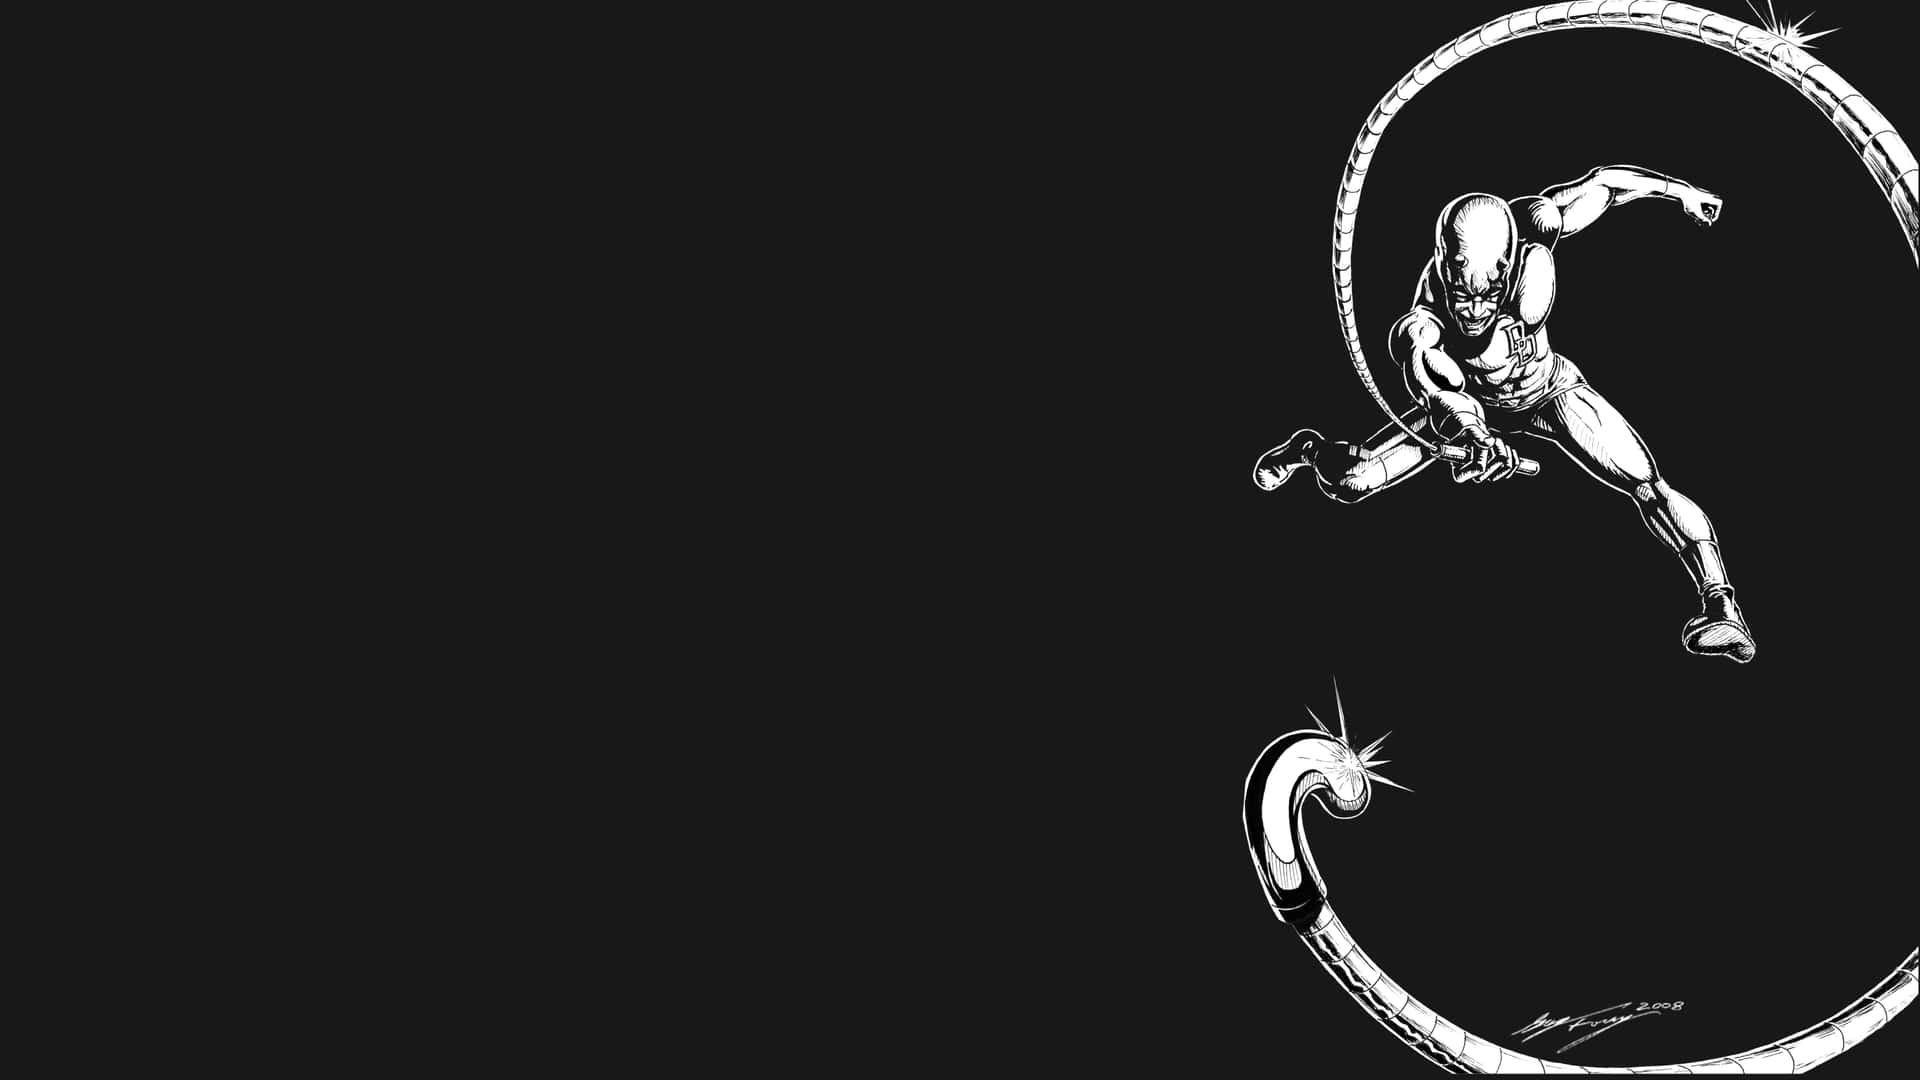 Marvel Black And White Daredevil With A Whip Wallpaper